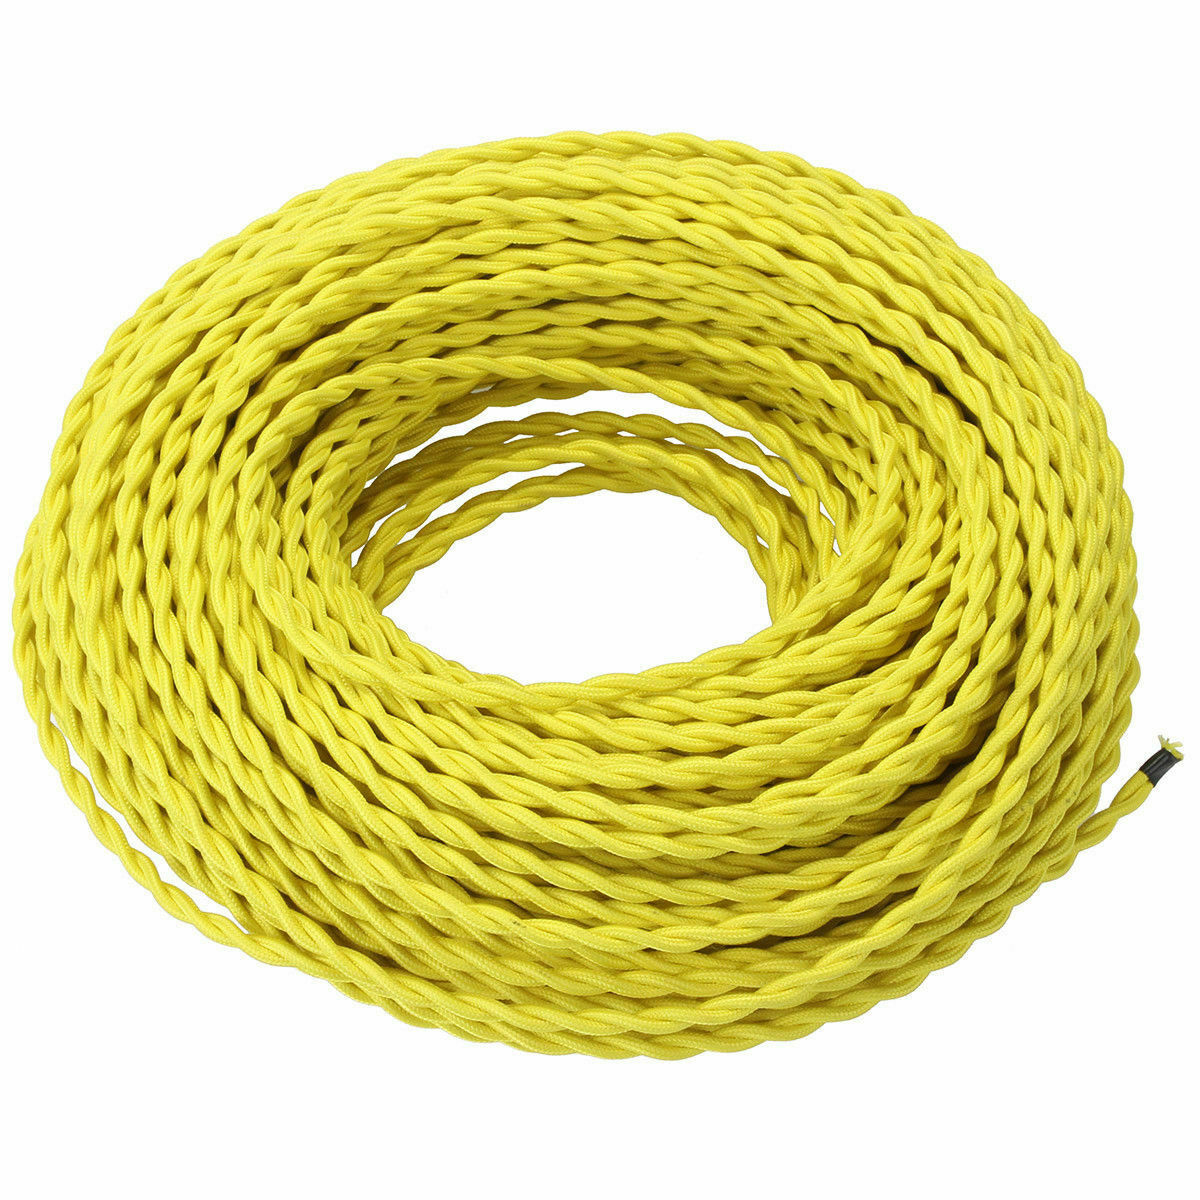 Light Yellow twisted cable.JPG